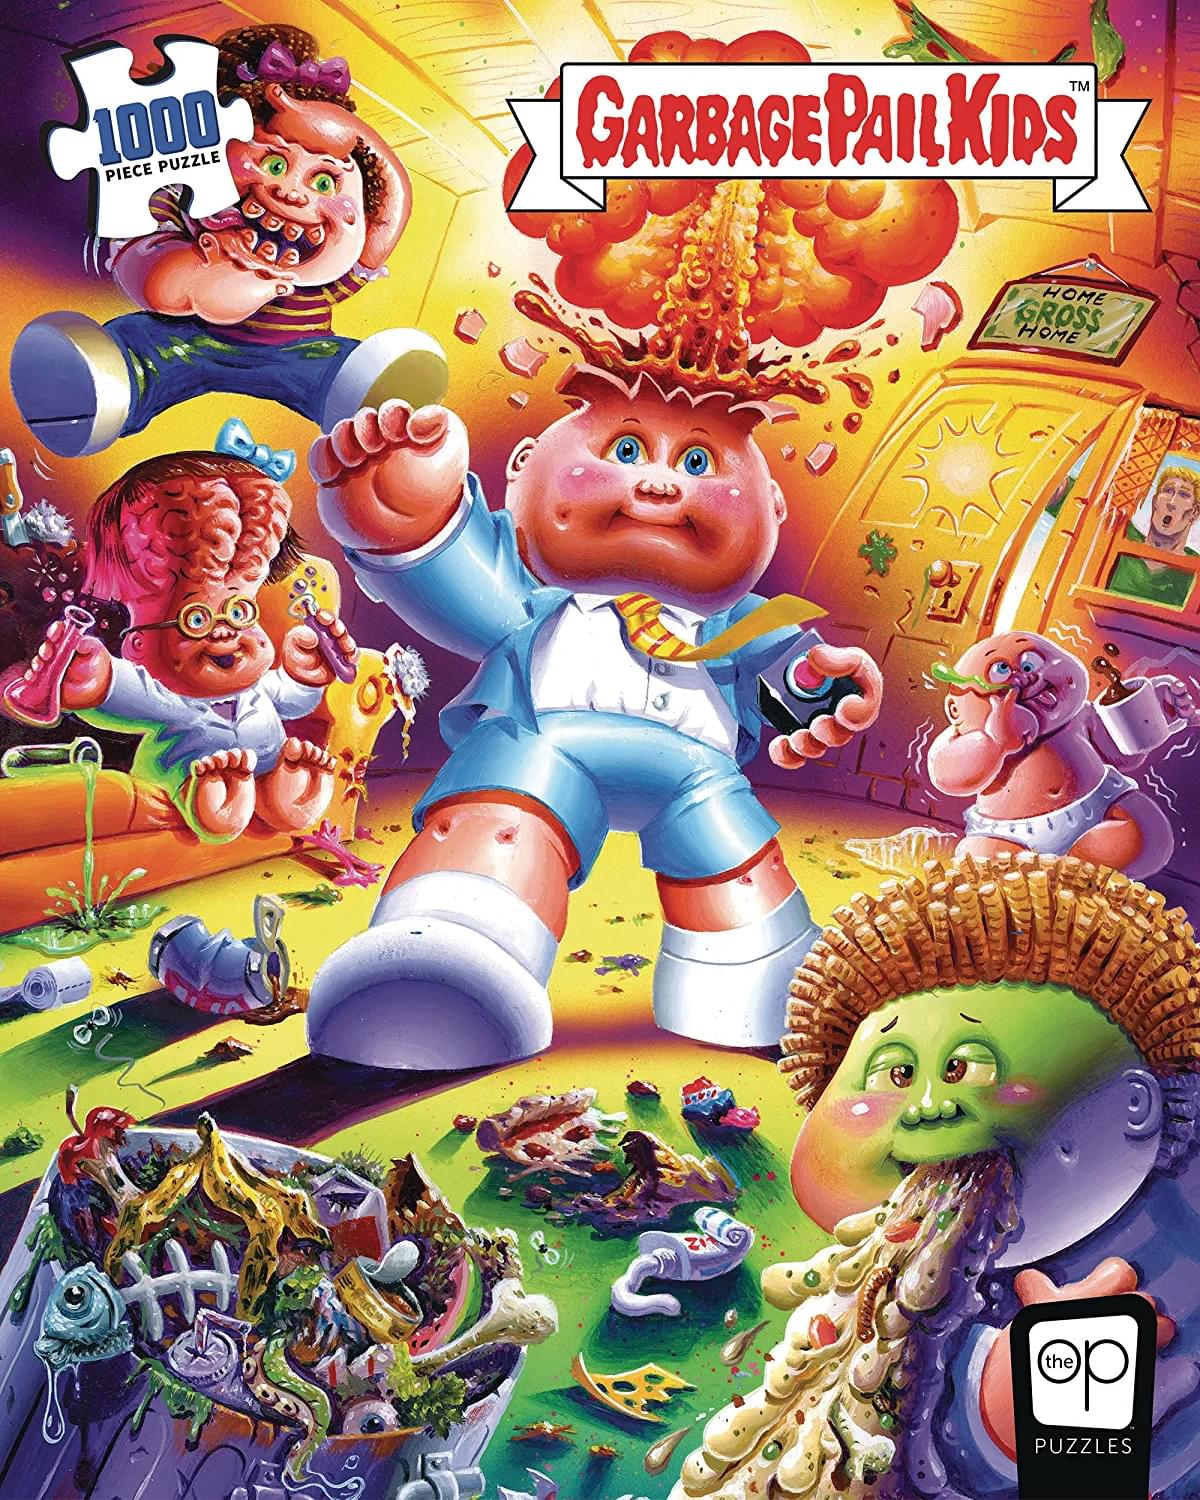 Garbage Pail Kids Home Gross Home 1000 Piece Jigsaw Puzzle